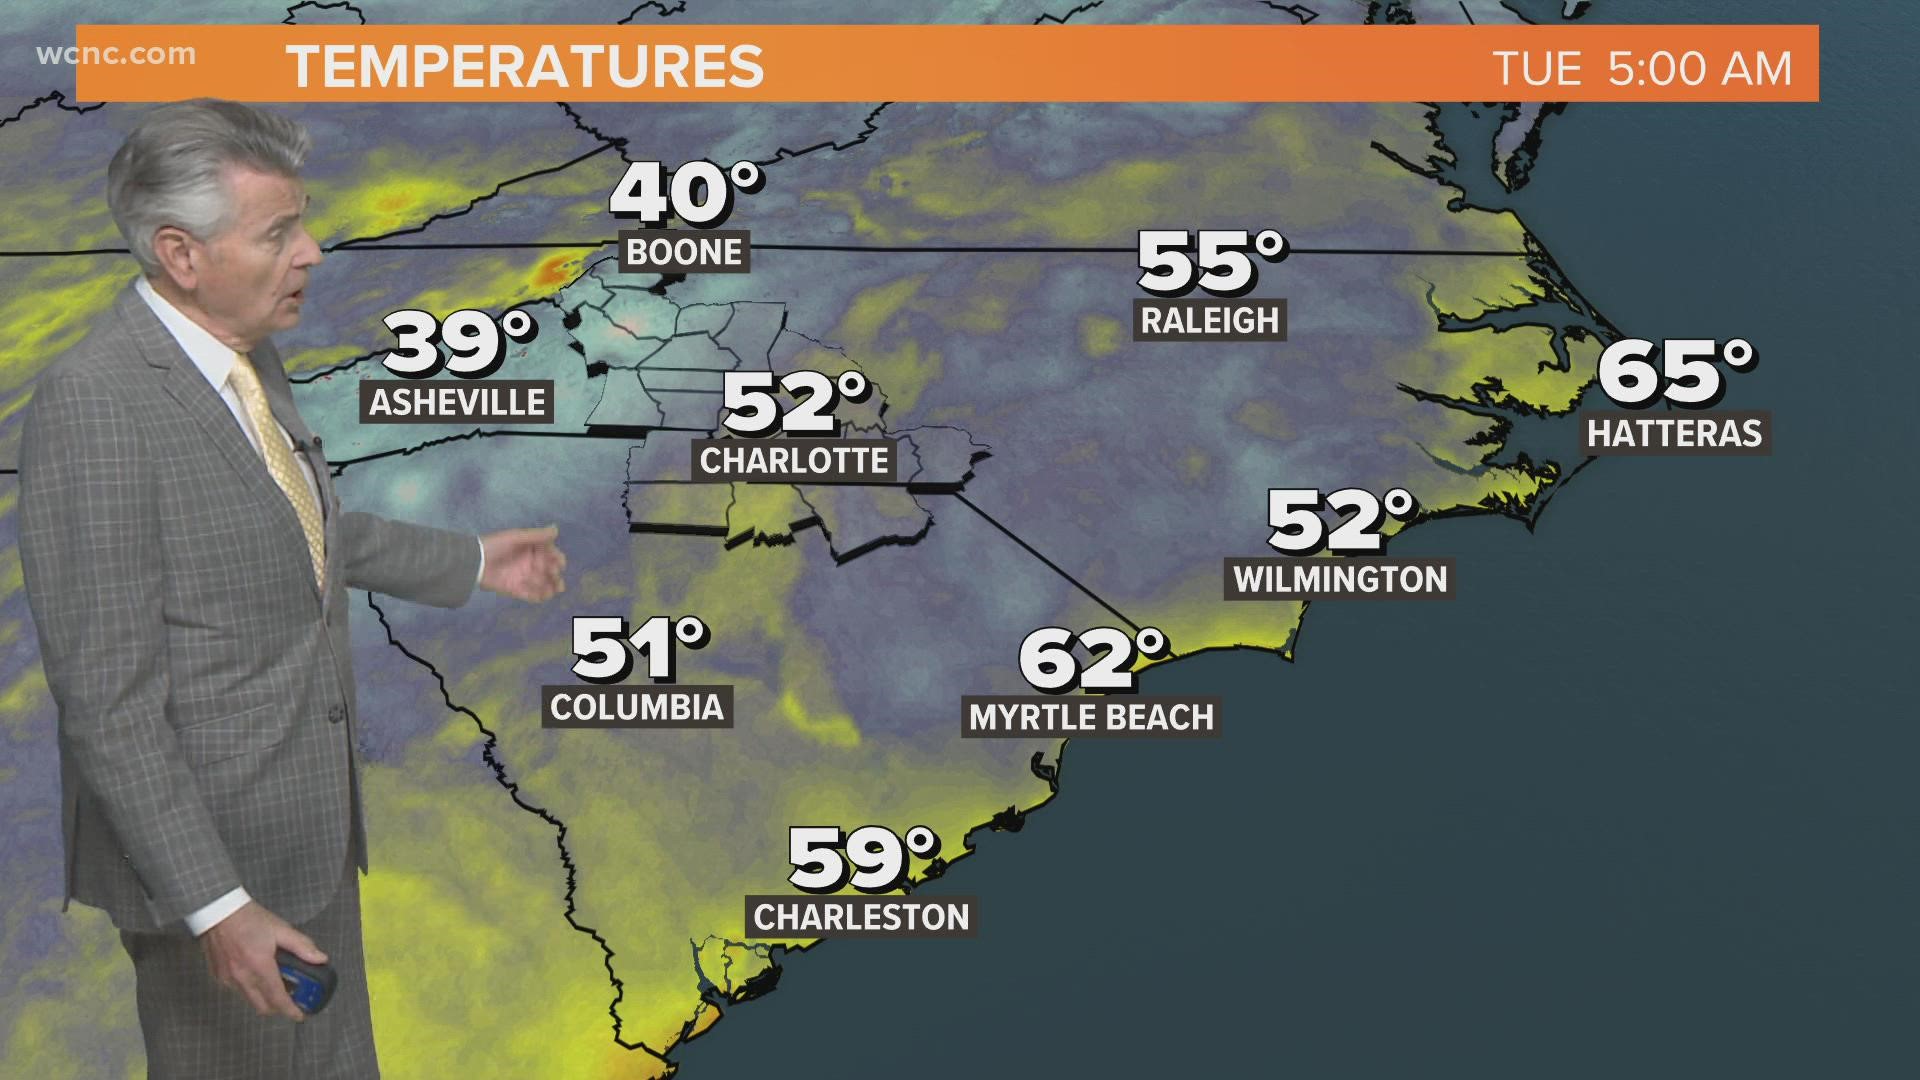 Charlotte Weather from WCNC in Charlotte, North Carolina